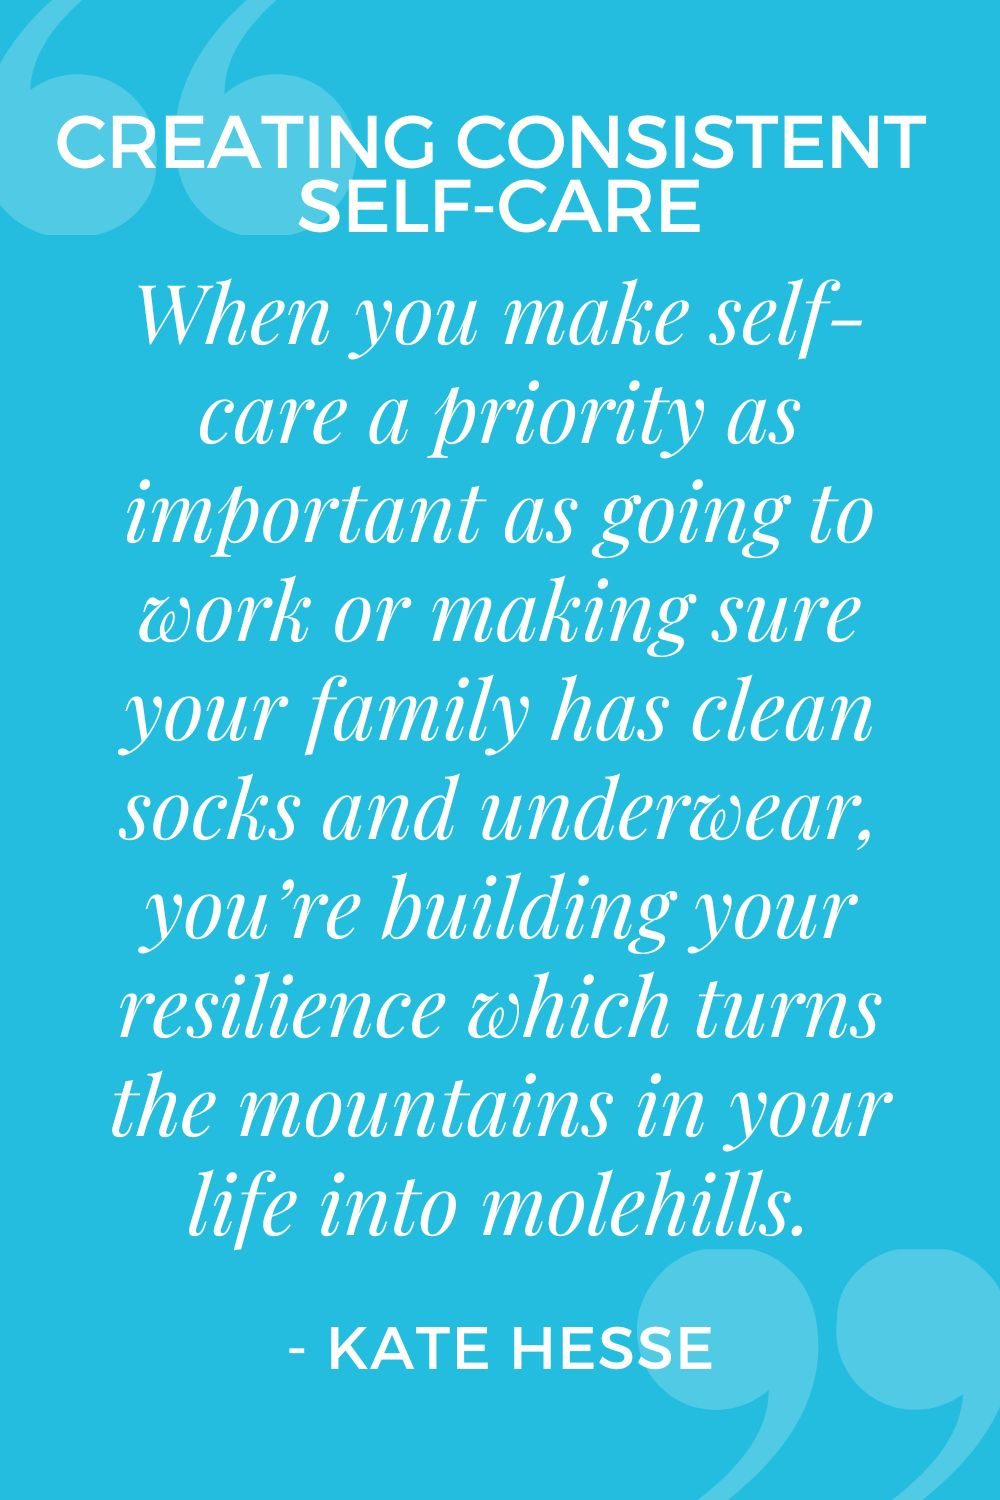 When you make self-care a priority as important as going to work or making sure your family have clean socks and underwear, you're building your resilience which turns the mountains in your life into molehills.